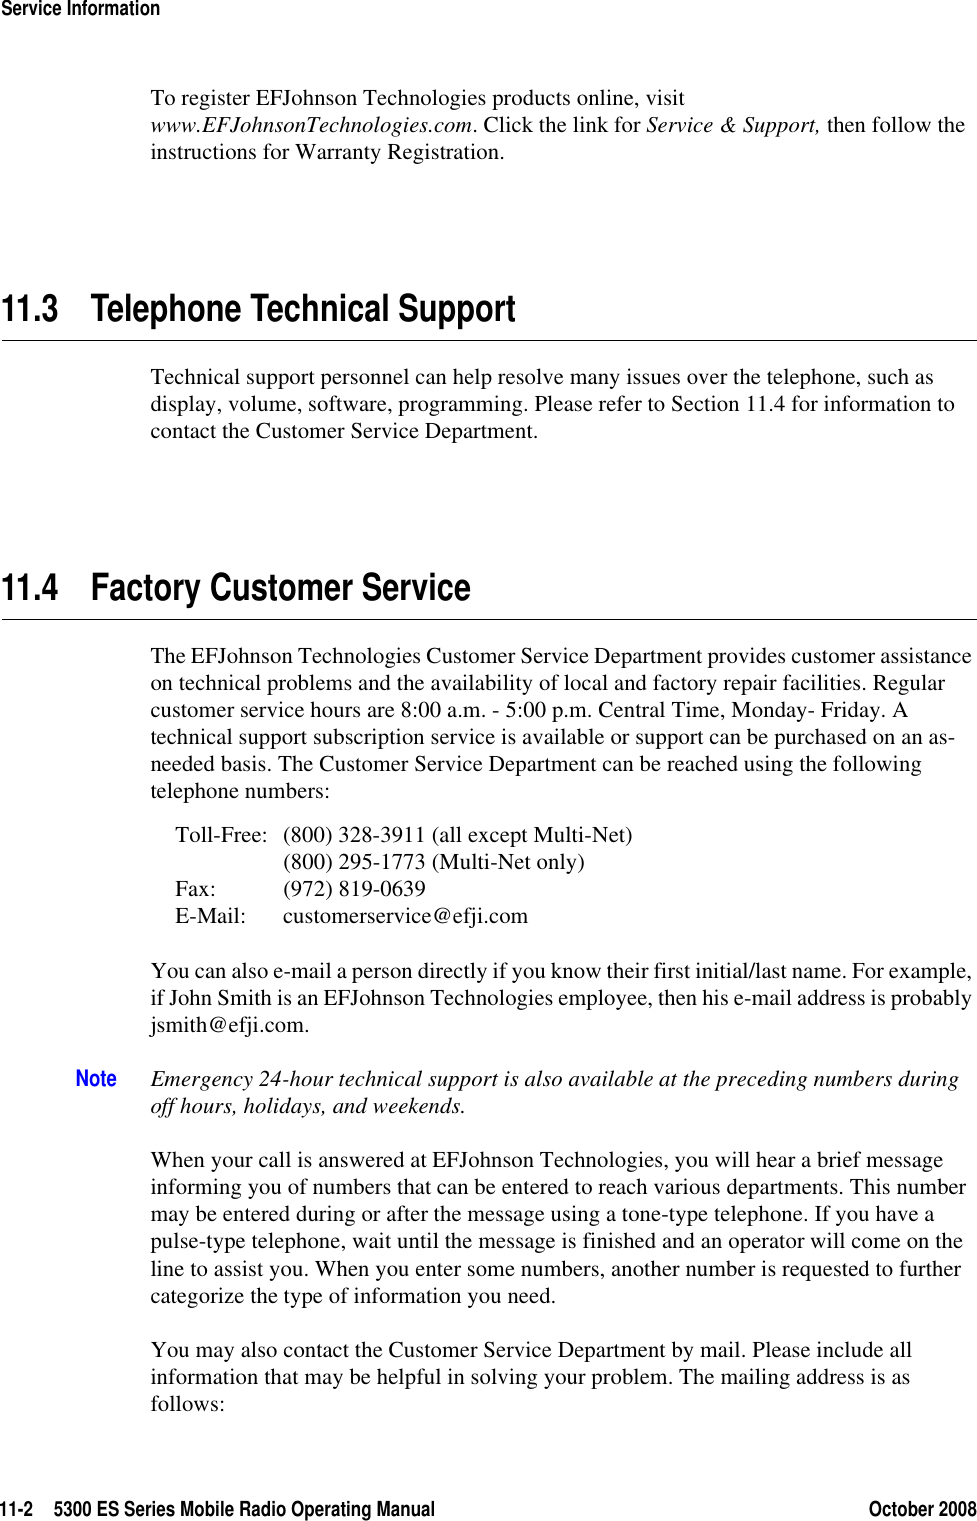 11-2 5300 ES Series Mobile Radio Operating Manual October 2008Service InformationTo register EFJohnson Technologies products online, visit www.EFJohnsonTechnologies.com. Click the link for Service &amp; Support, then follow the instructions for Warranty Registration.11.3 Telephone Technical SupportTechnical support personnel can help resolve many issues over the telephone, such as display, volume, software, programming. Please refer to Section 11.4 for information to contact the Customer Service Department.11.4 Factory Customer ServiceThe EFJohnson Technologies Customer Service Department provides customer assistance on technical problems and the availability of local and factory repair facilities. Regular customer service hours are 8:00 a.m. - 5:00 p.m. Central Time, Monday- Friday. A technical support subscription service is available or support can be purchased on an as-needed basis. The Customer Service Department can be reached using the following telephone numbers:Toll-Free: (800) 328-3911 (all except Multi-Net)(800) 295-1773 (Multi-Net only)Fax: (972) 819-0639E-Mail: customerservice@efji.comYou can also e-mail a person directly if you know their first initial/last name. For example, if John Smith is an EFJohnson Technologies employee, then his e-mail address is probably jsmith@efji.com.Note Emergency 24-hour technical support is also available at the preceding numbers during off hours, holidays, and weekends.When your call is answered at EFJohnson Technologies, you will hear a brief message informing you of numbers that can be entered to reach various departments. This number may be entered during or after the message using a tone-type telephone. If you have a pulse-type telephone, wait until the message is finished and an operator will come on the line to assist you. When you enter some numbers, another number is requested to further categorize the type of information you need.You may also contact the Customer Service Department by mail. Please include all information that may be helpful in solving your problem. The mailing address is as follows: